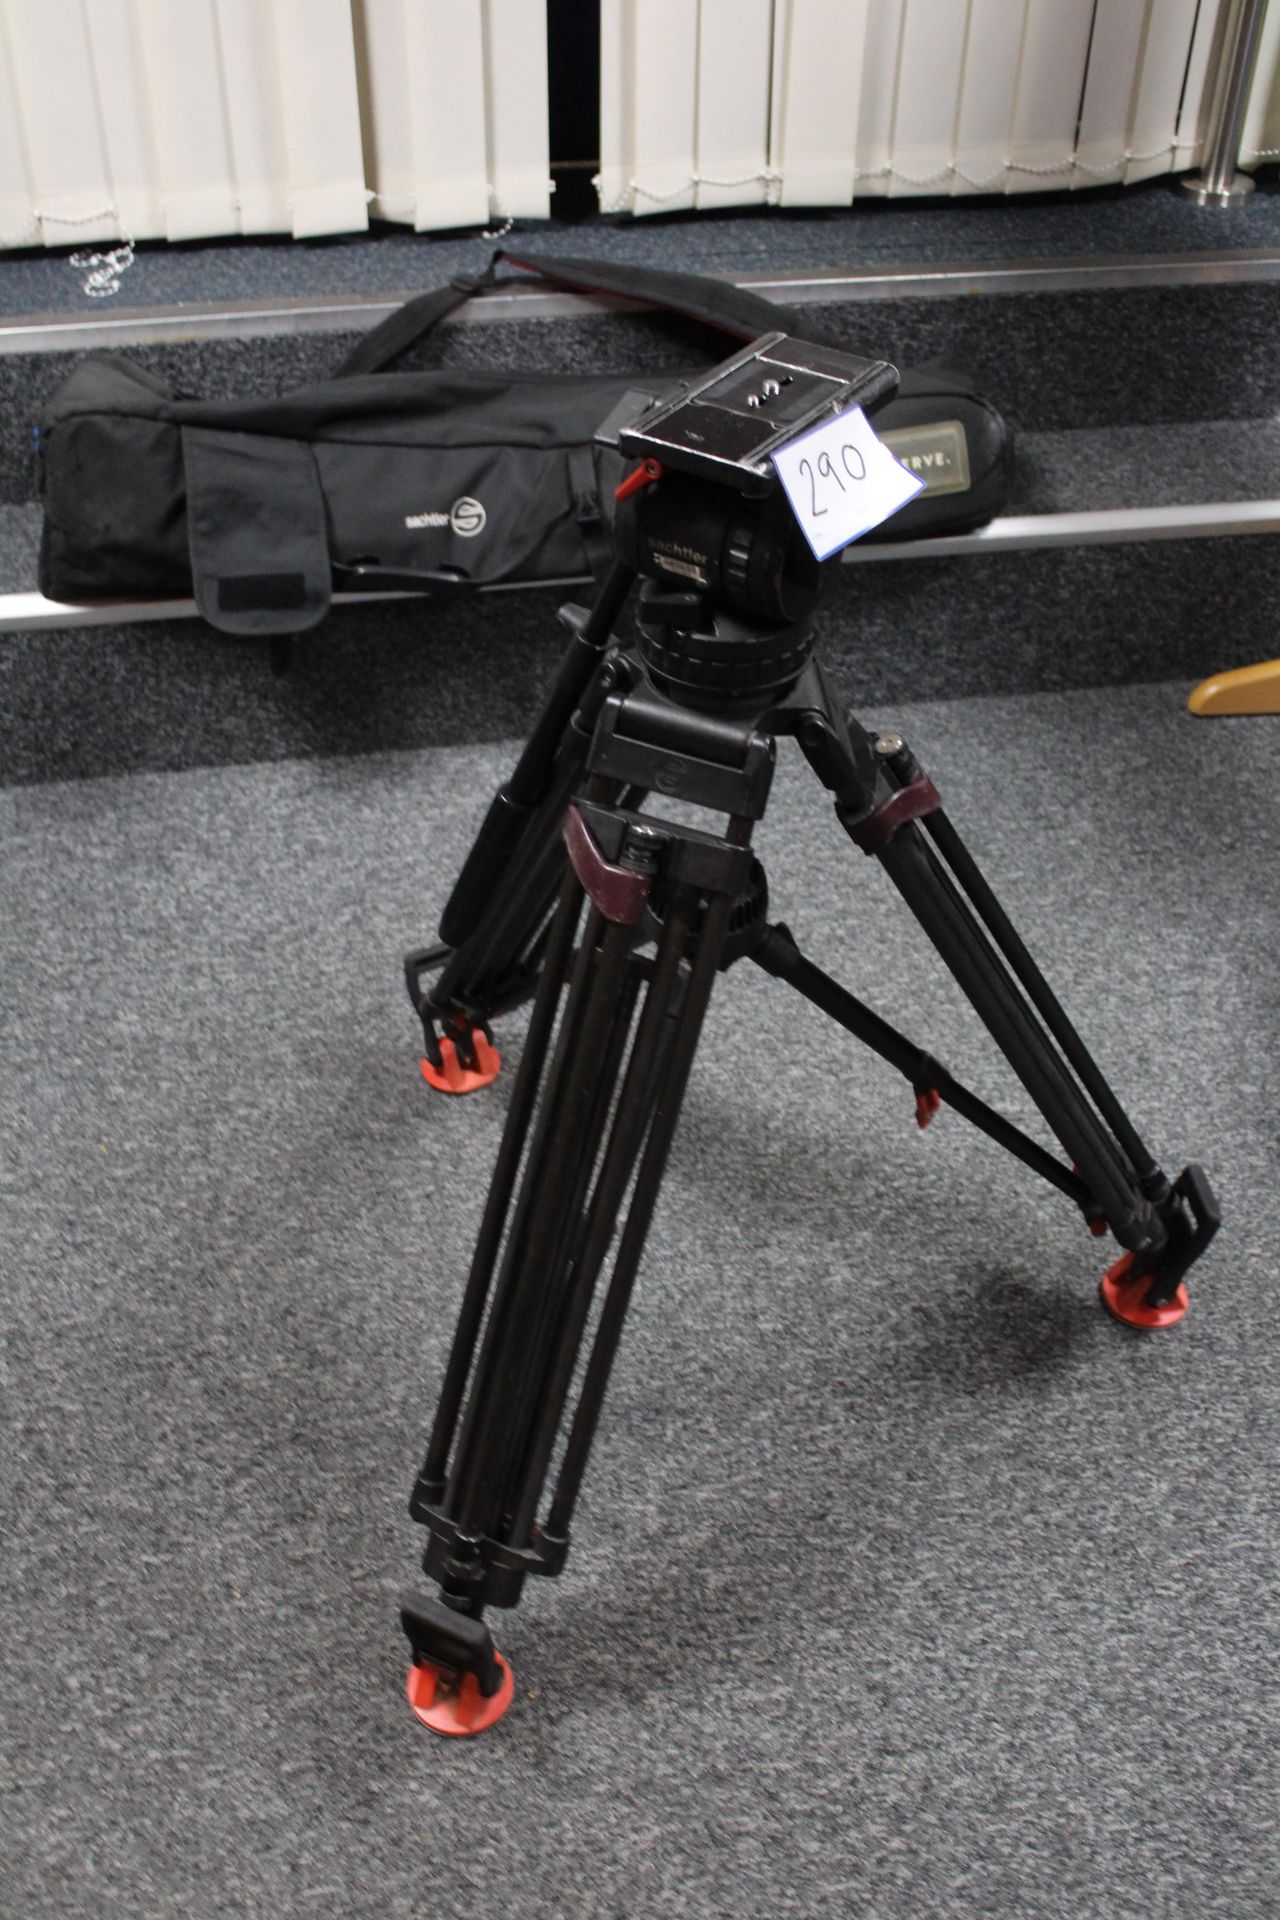 Sachtler Video 18P Professional Tripod With Carry Case